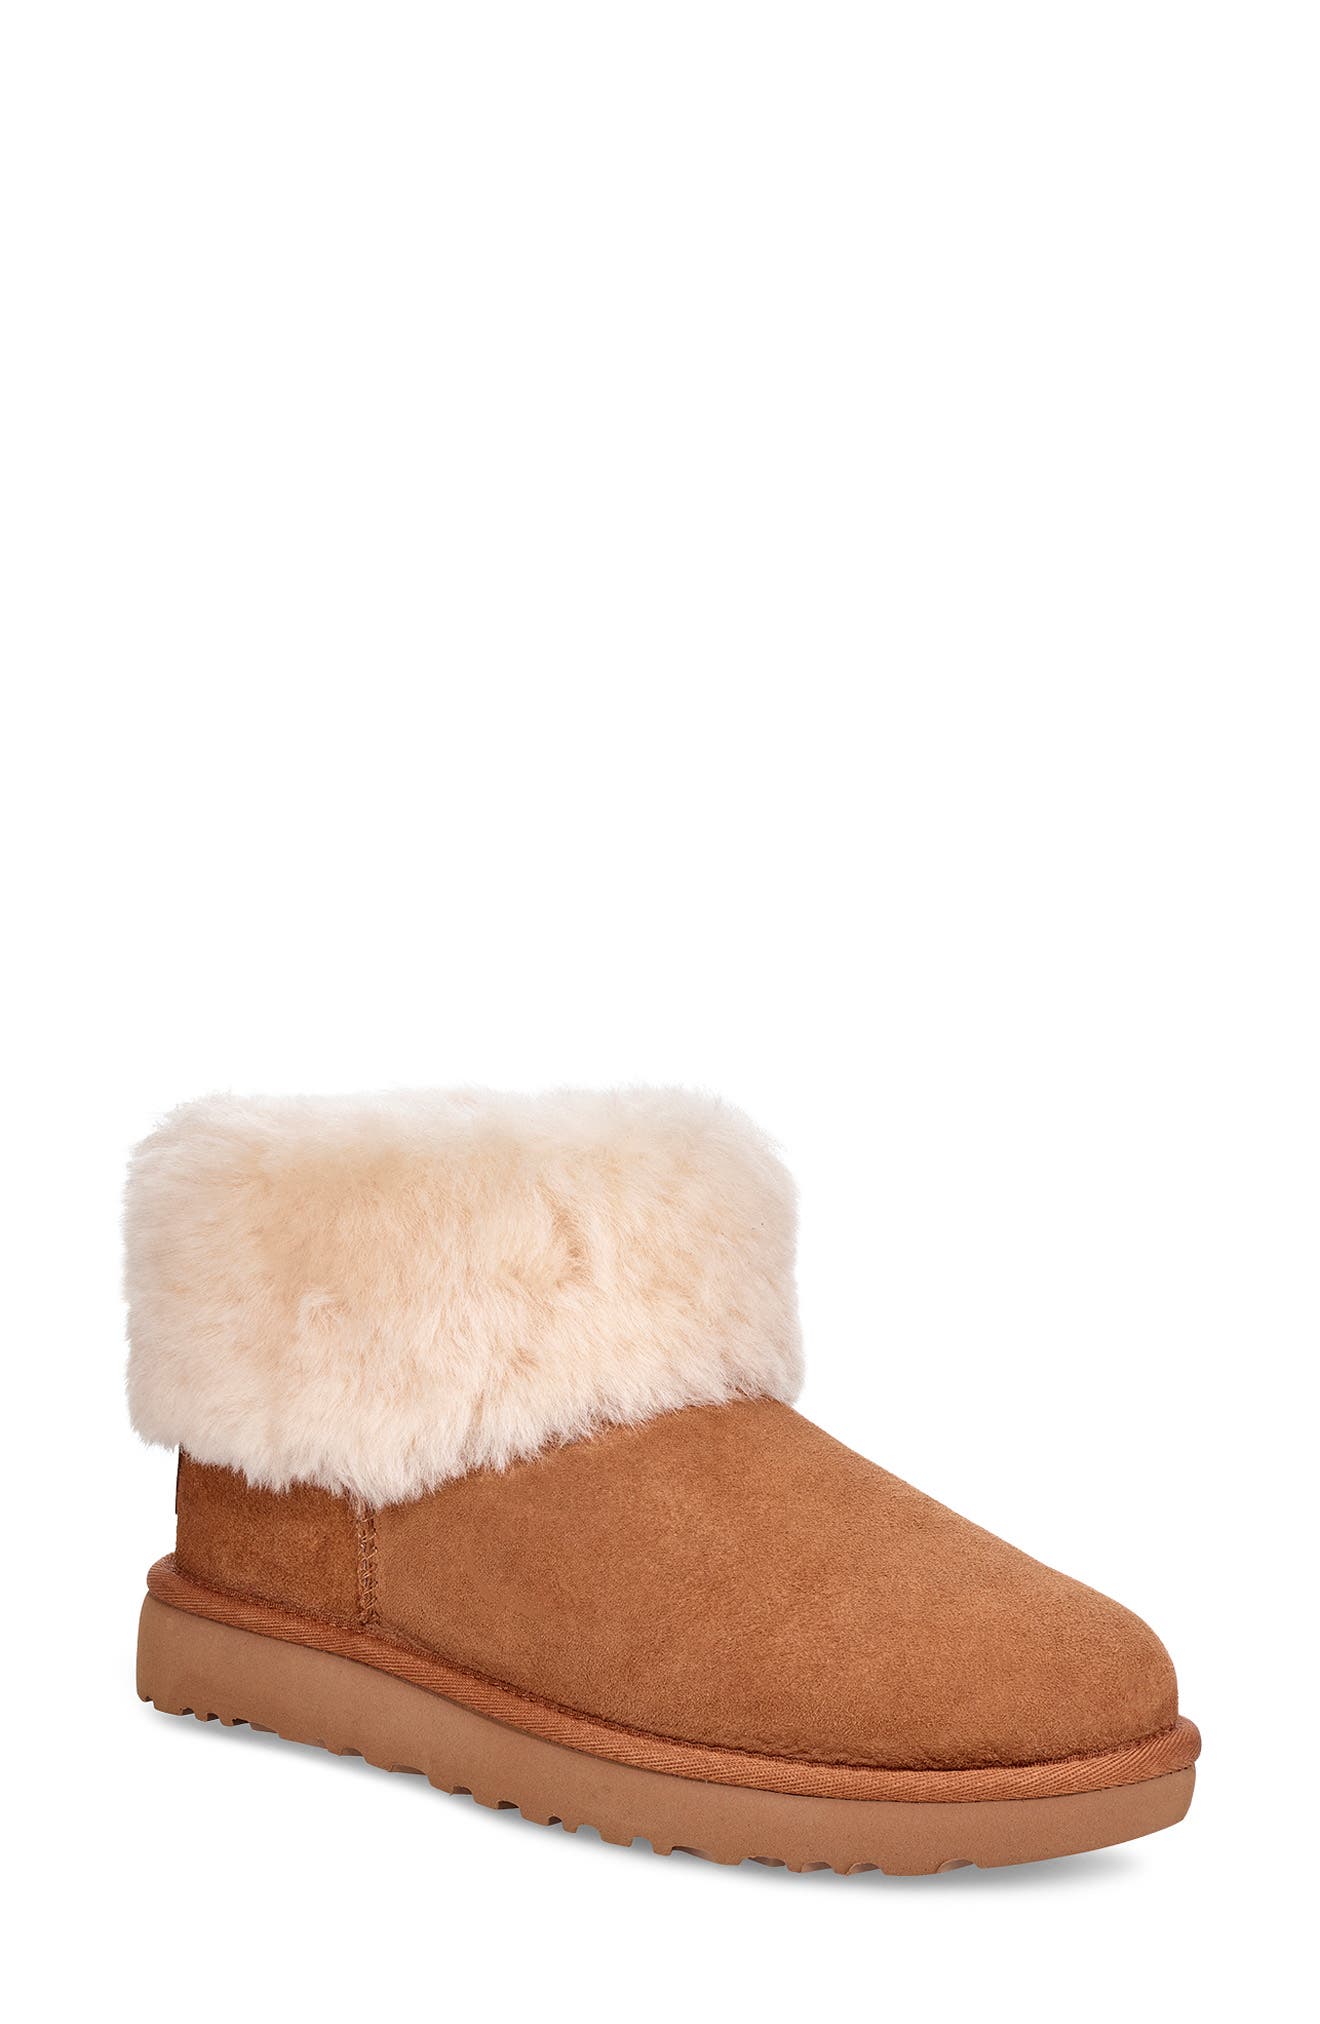 uggs women's boots clearance